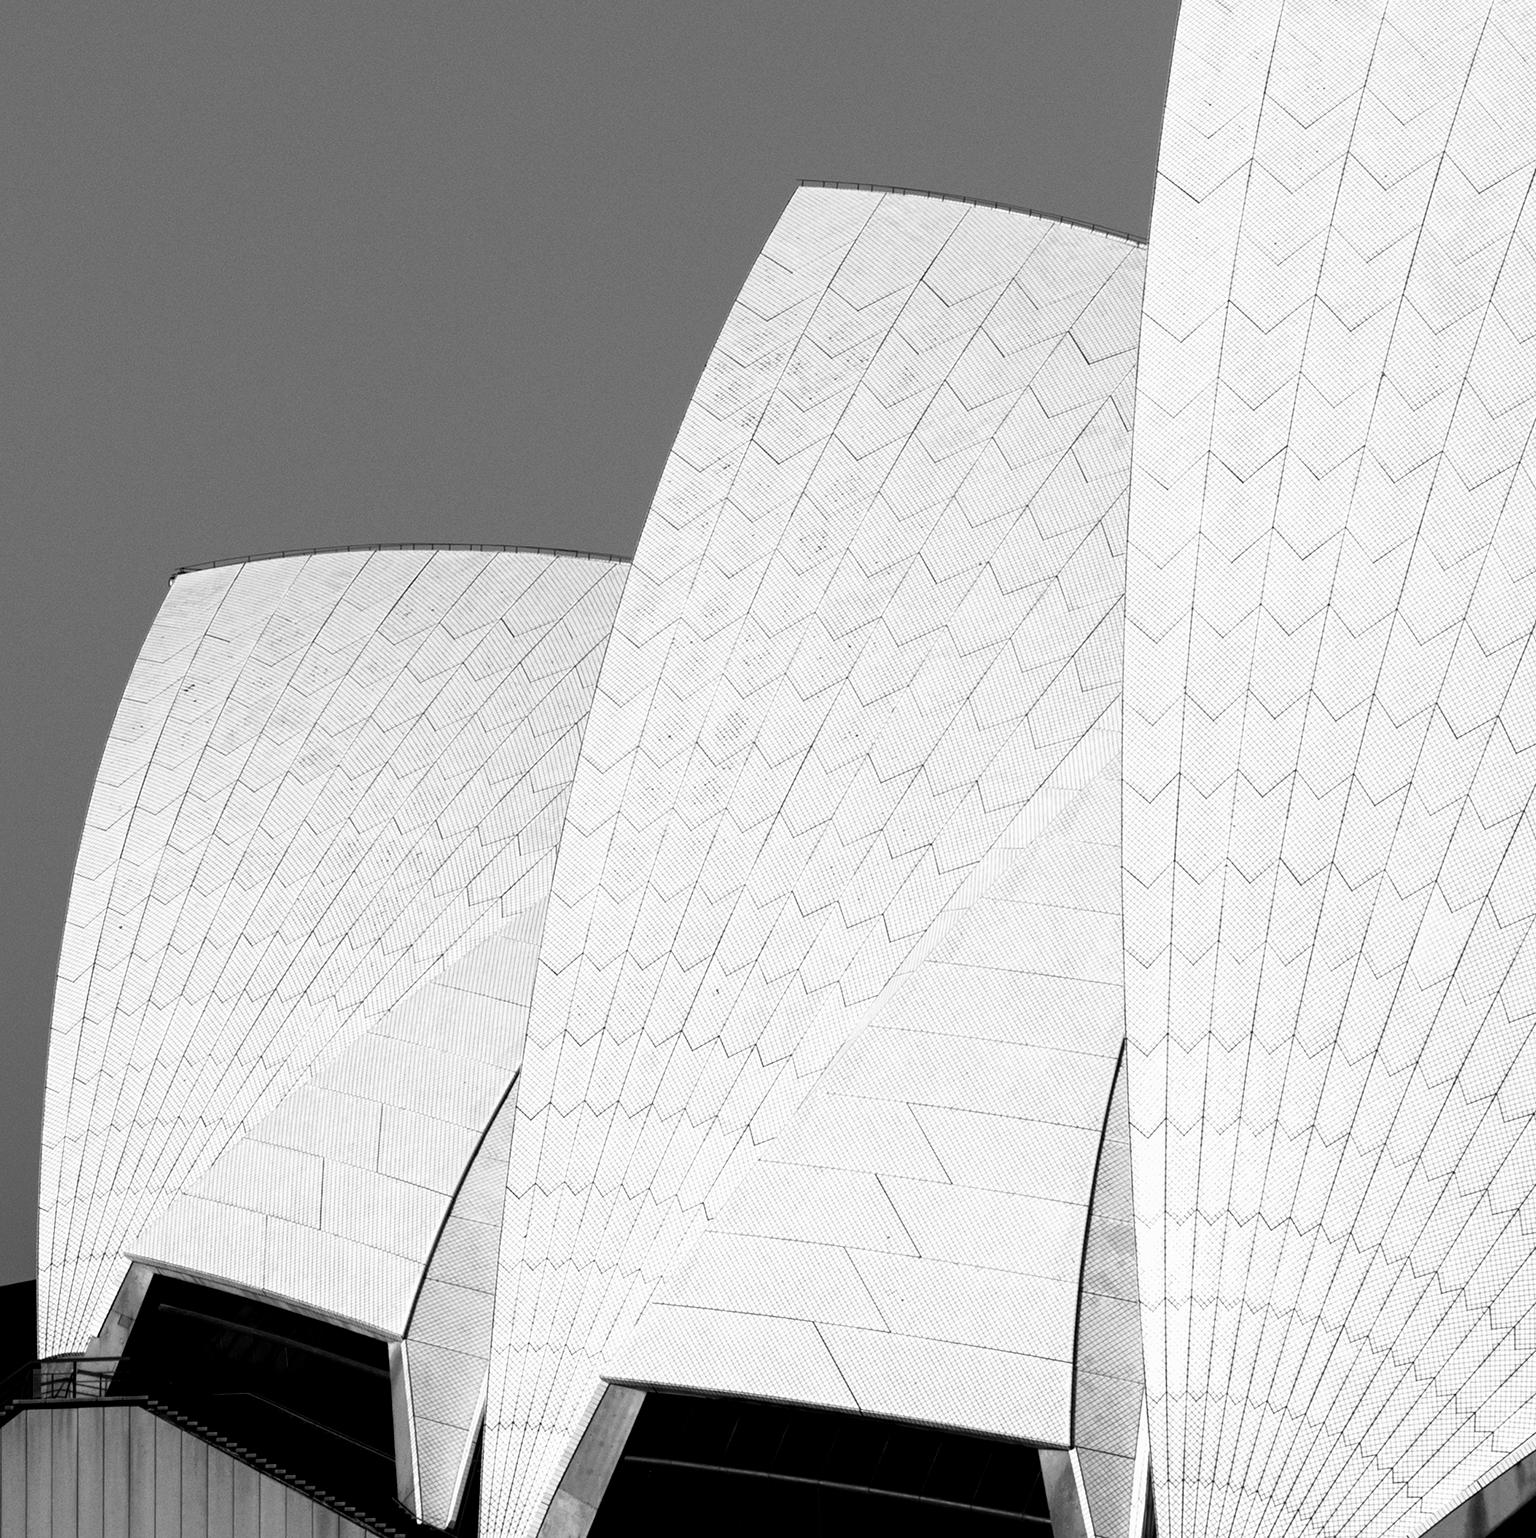 Photograph by Cosmo Condina of a toned architectural graphic view in black and white of the Sydney Opera House.
 Archival Pigment Print, 19” X 9”, Edition of 10. This is #3/10 in the edition.
 
This is a graphic view of the Sydney Opera House, a